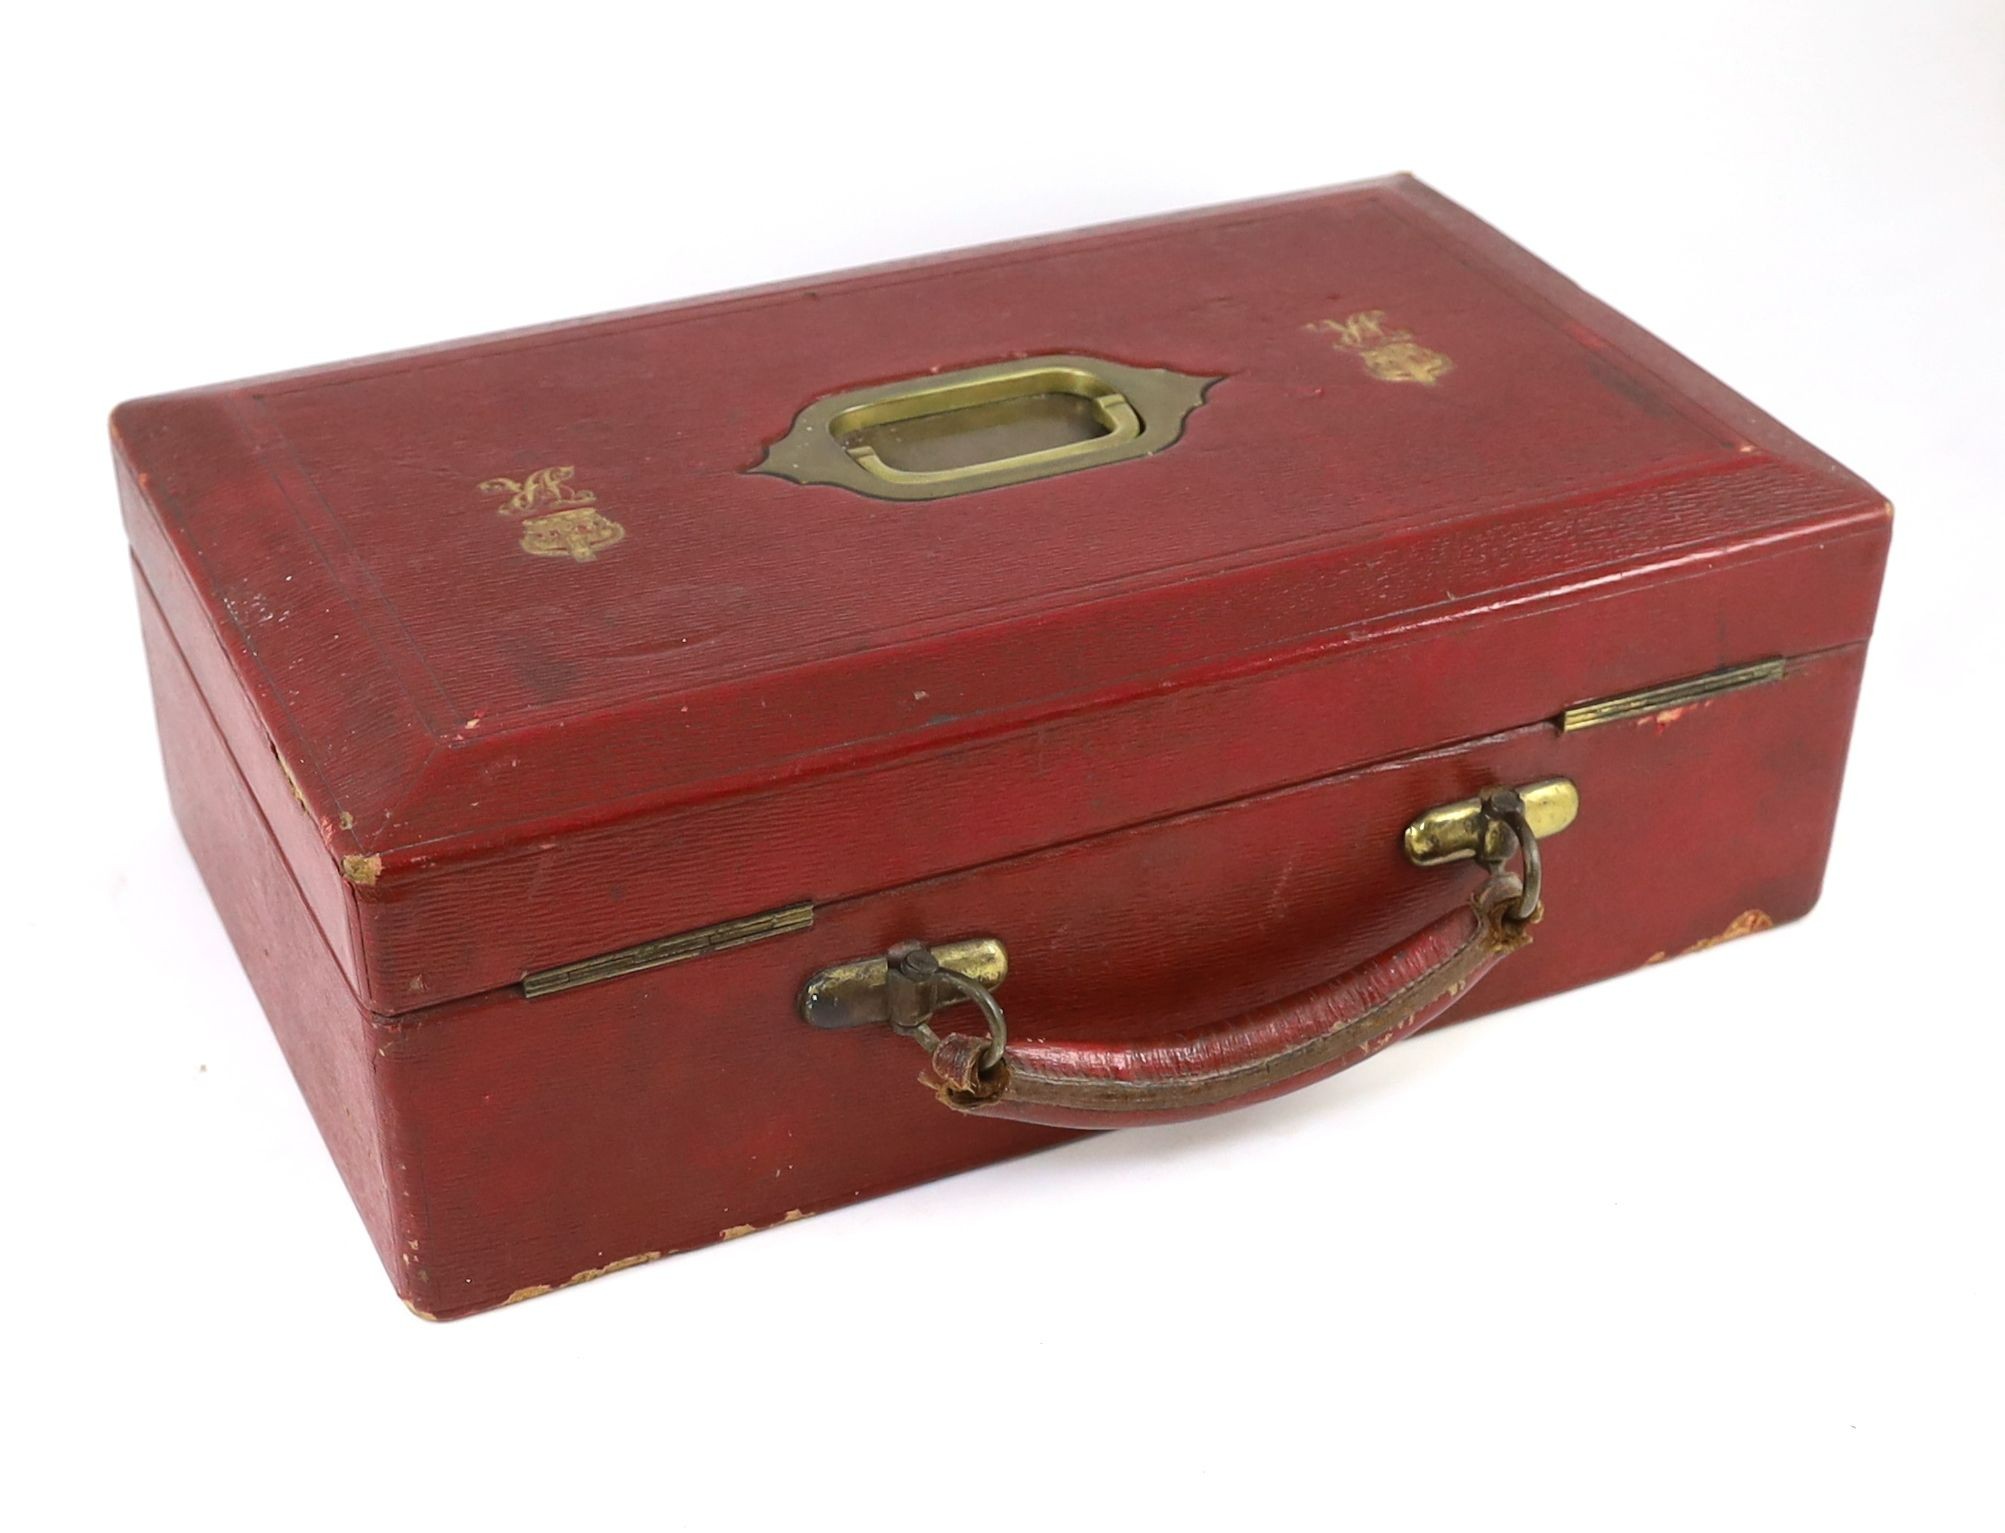 A Victorian red morocco despatch box, formerly the property of the Right Honourable Viscount Cross GCBGCSI, width 46cm, depth 28cm, height 15cm